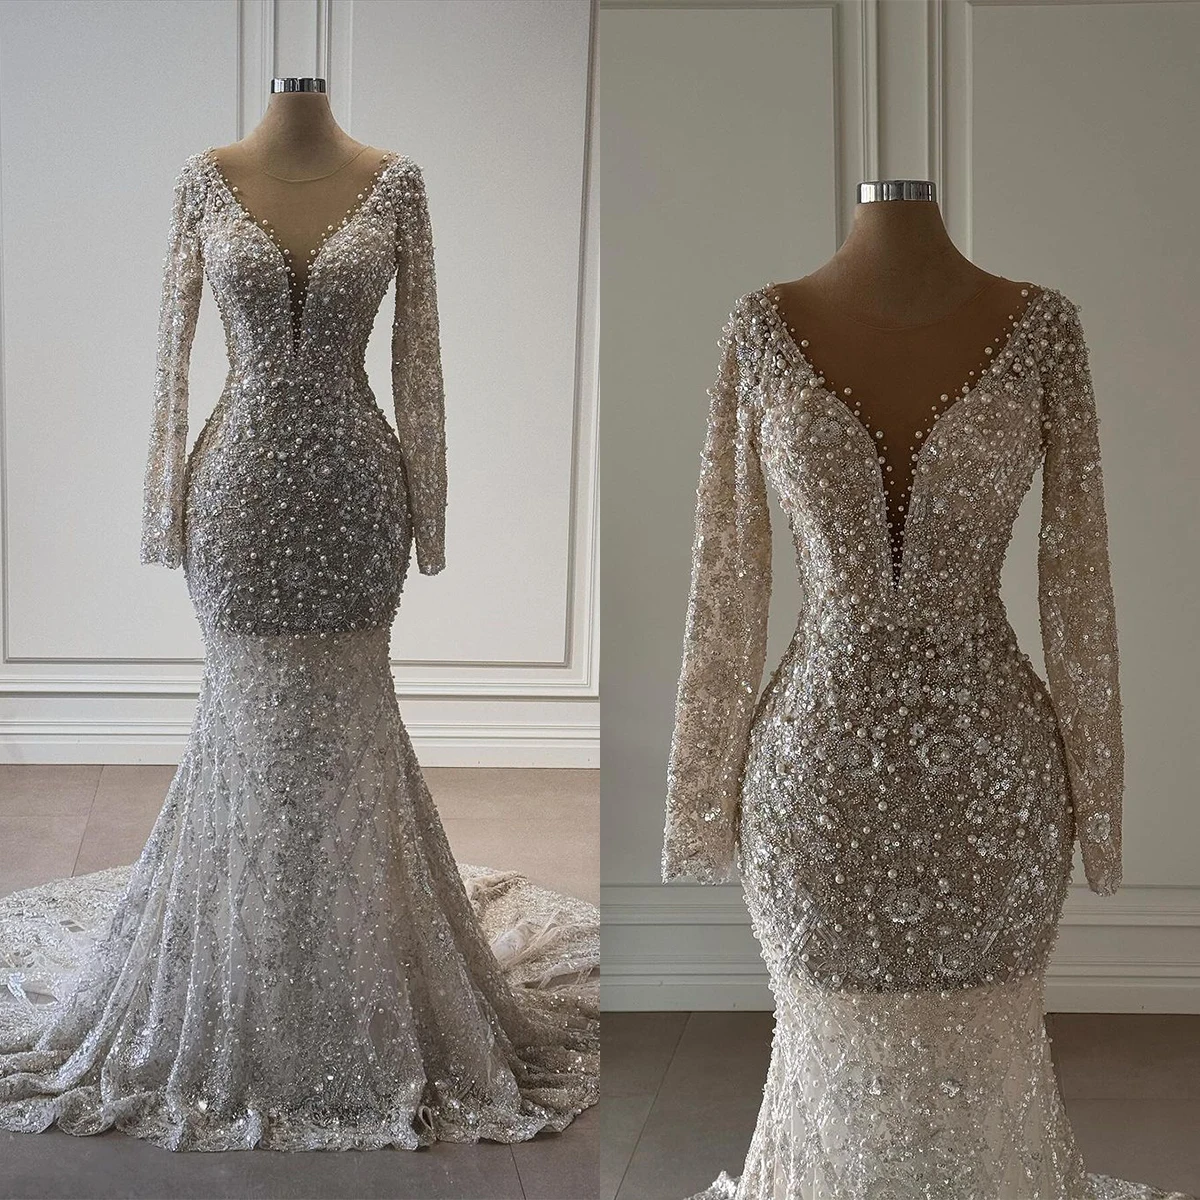 Sexy Mermaid Gown Wedding Dresses Pearls Sequined Lace Bridal Gowns Long-Sleeve Sweep Train Big Size Custom Size Colour 1